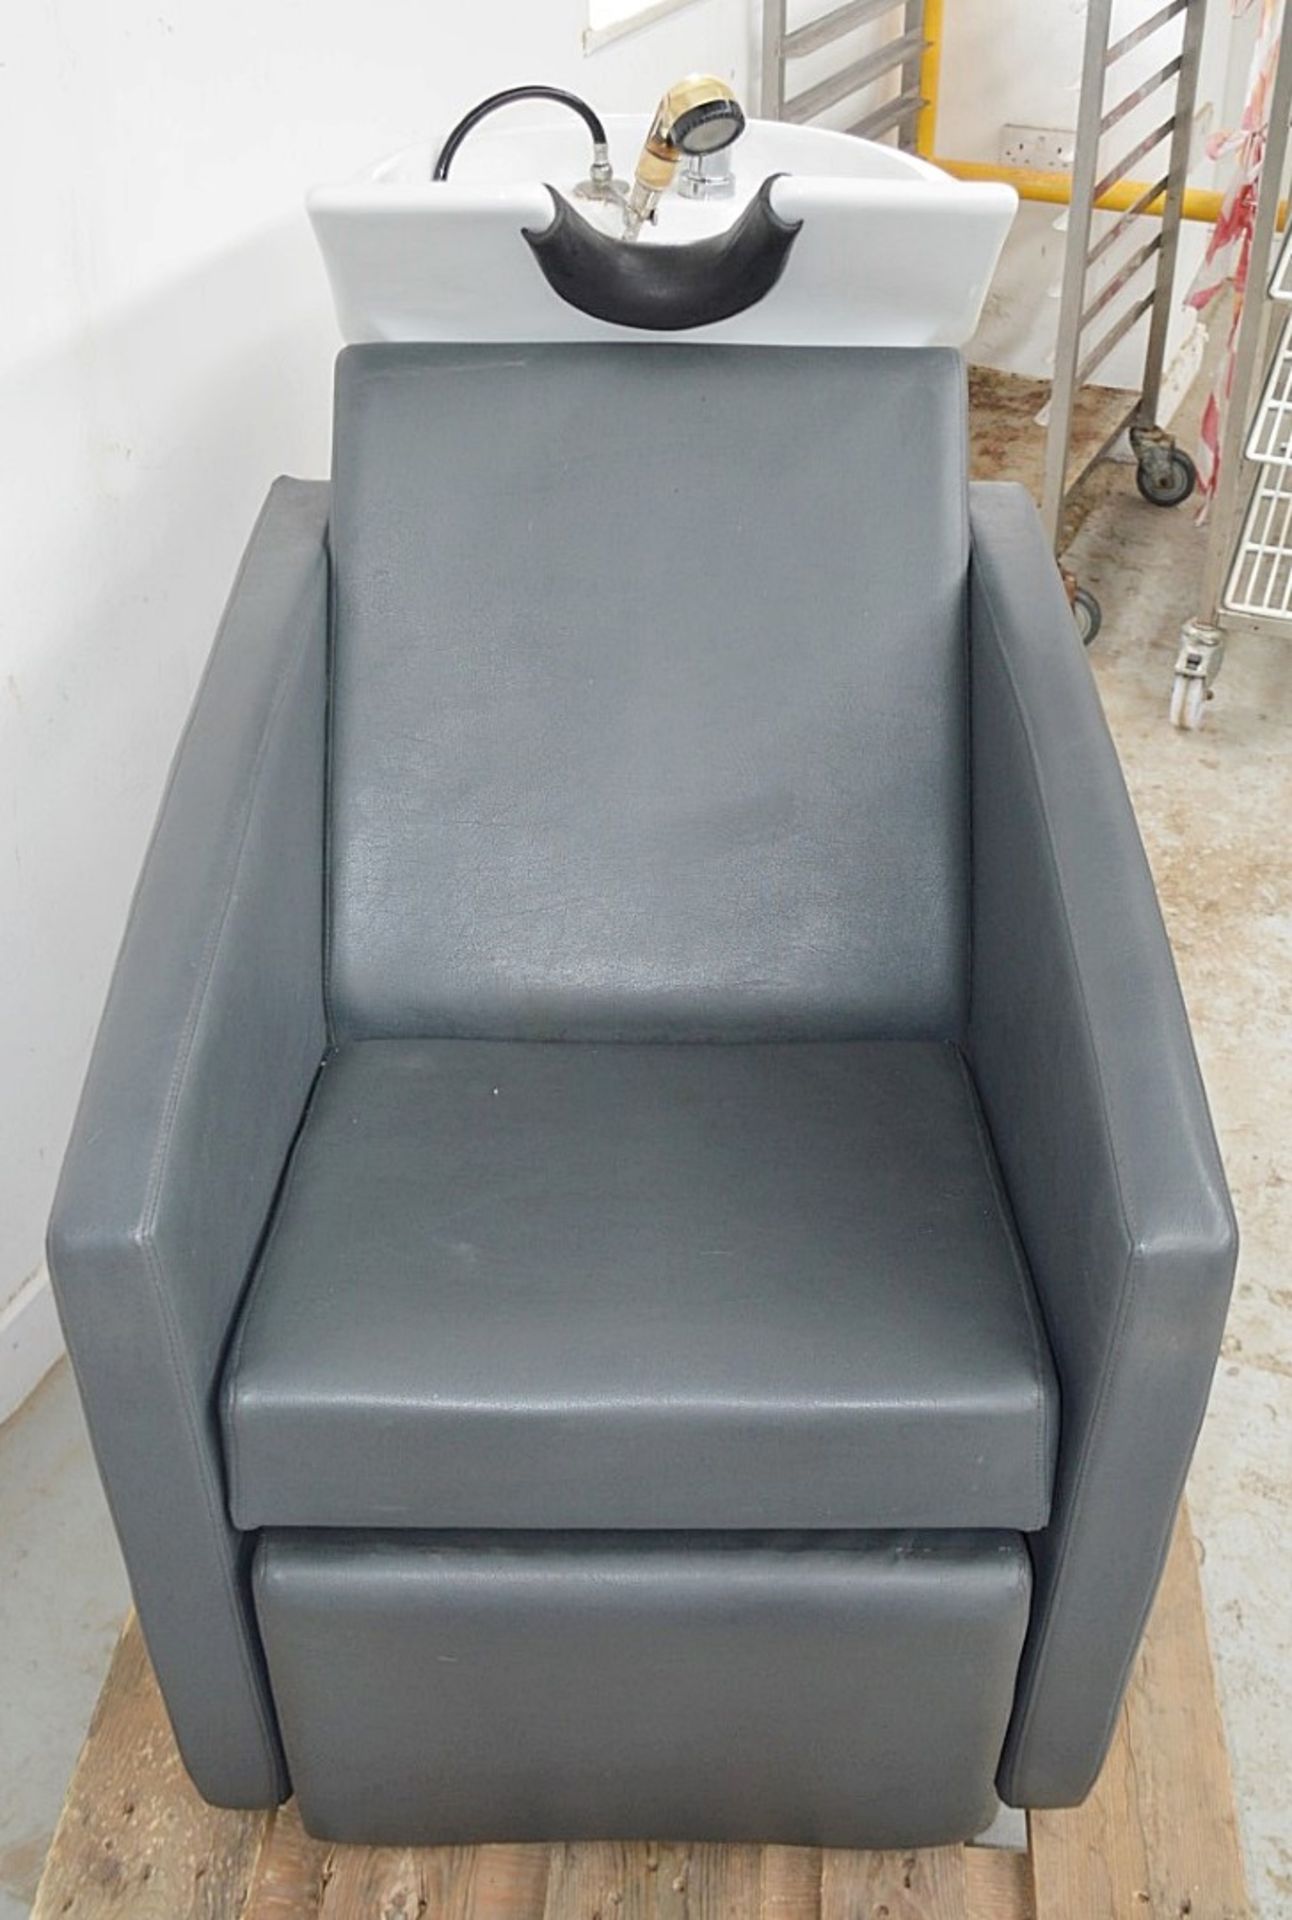 1 x Professional Reclining Hair Washing Chair With Basin Shower And Foot Rest - Image 9 of 19